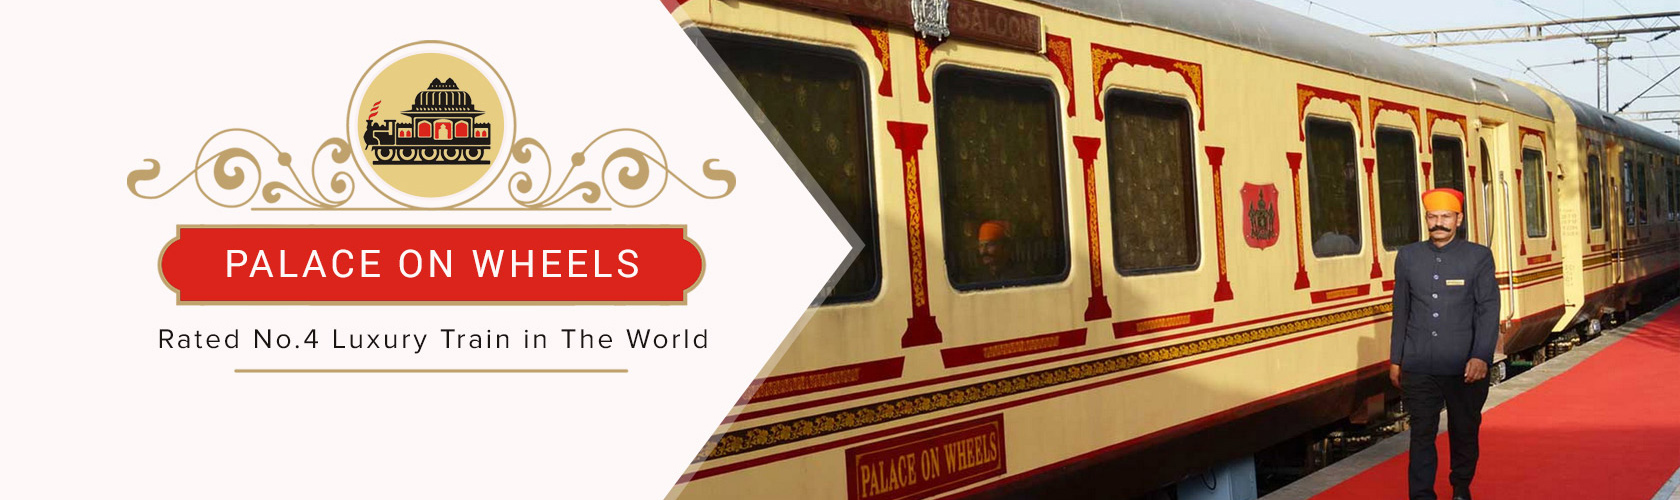 Palace on Wheels Train Exterior View 